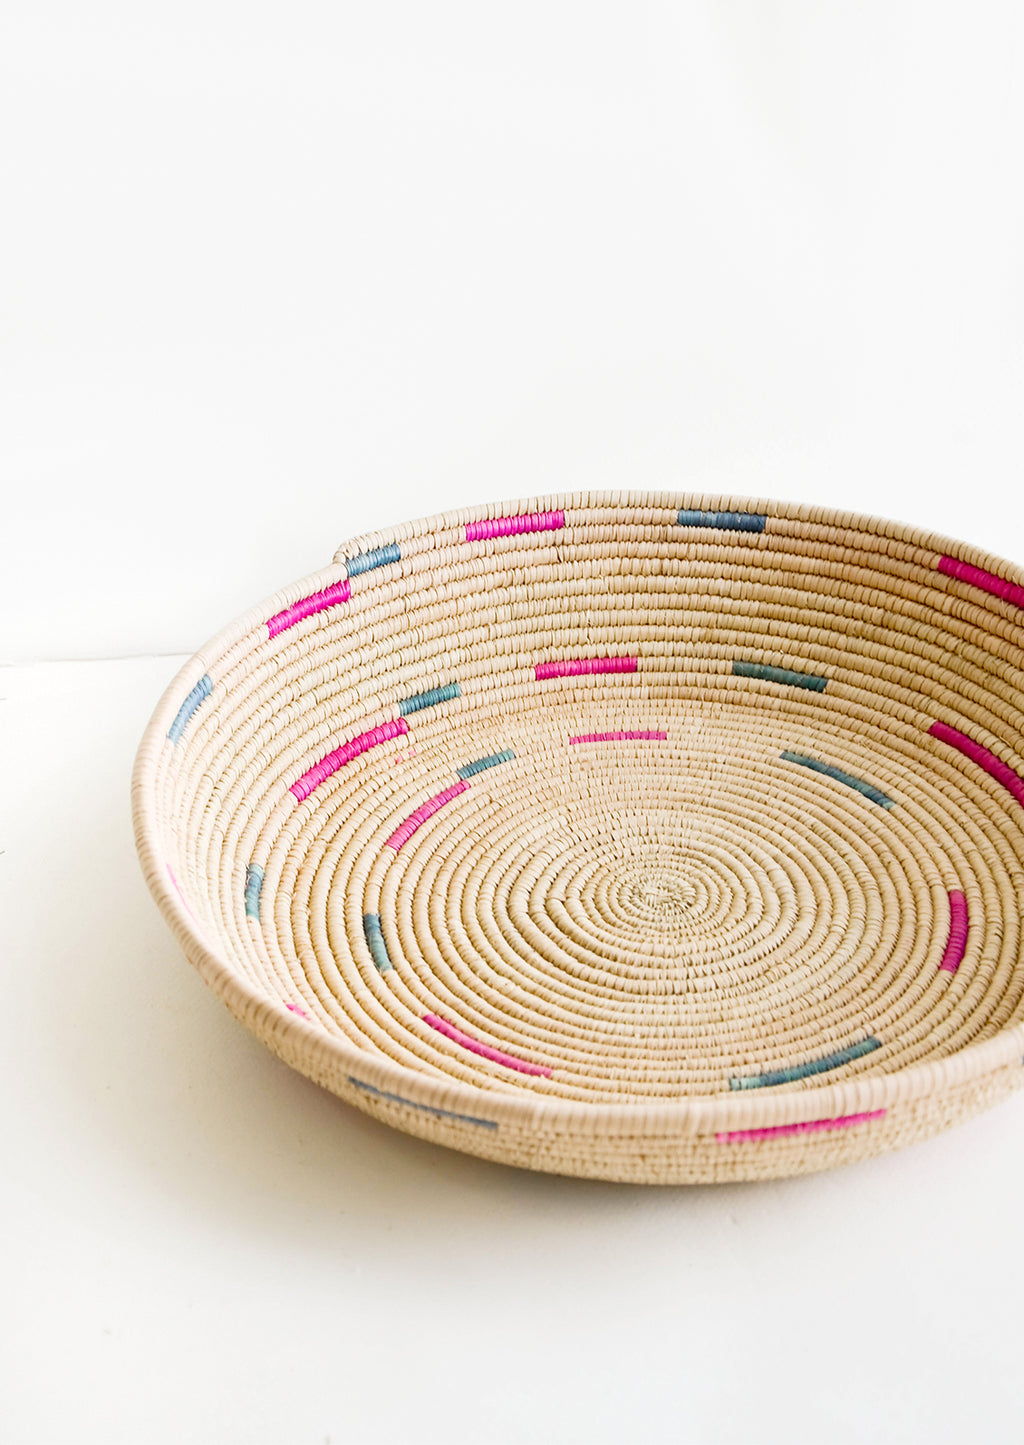 1: Woven platter made from date palm with pink and green design